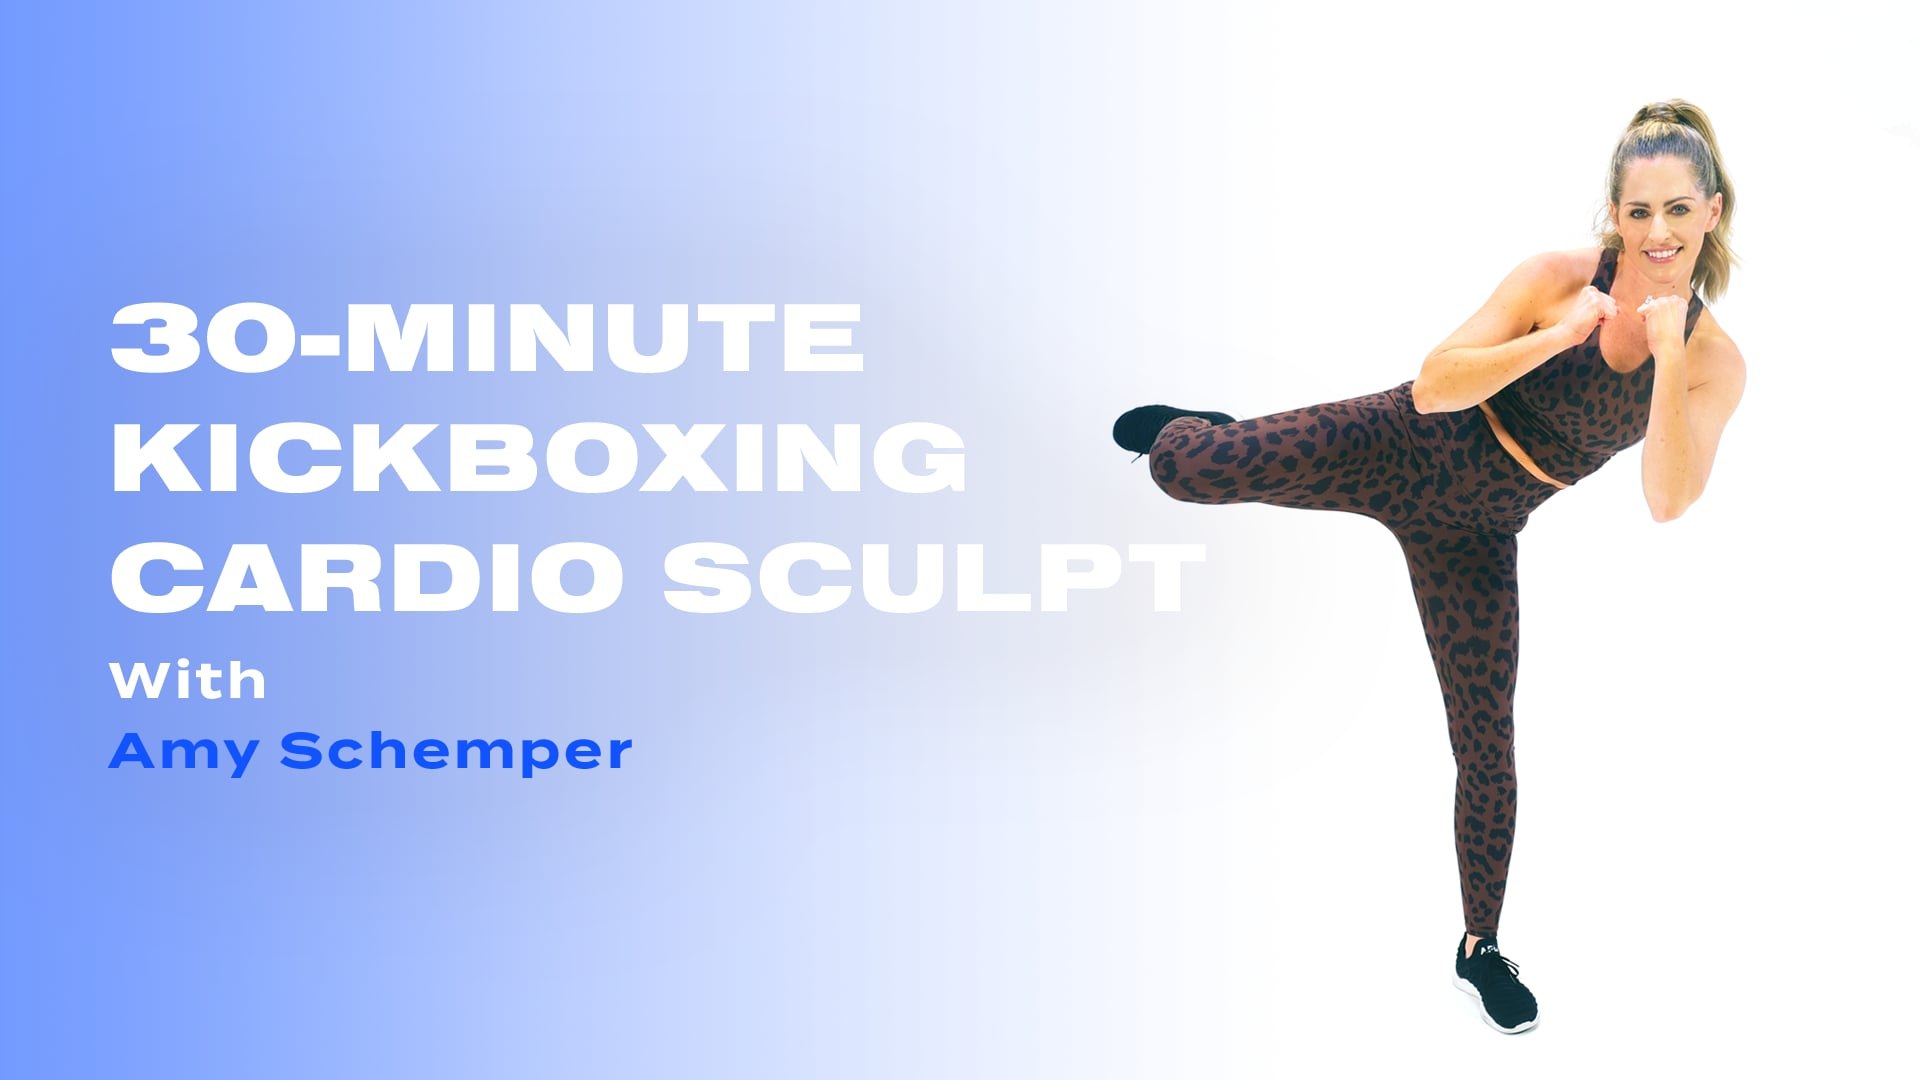 30-Minute Kickboxing and Cardio Sculpt Routine With Amy Schemper - video  Dailymotion